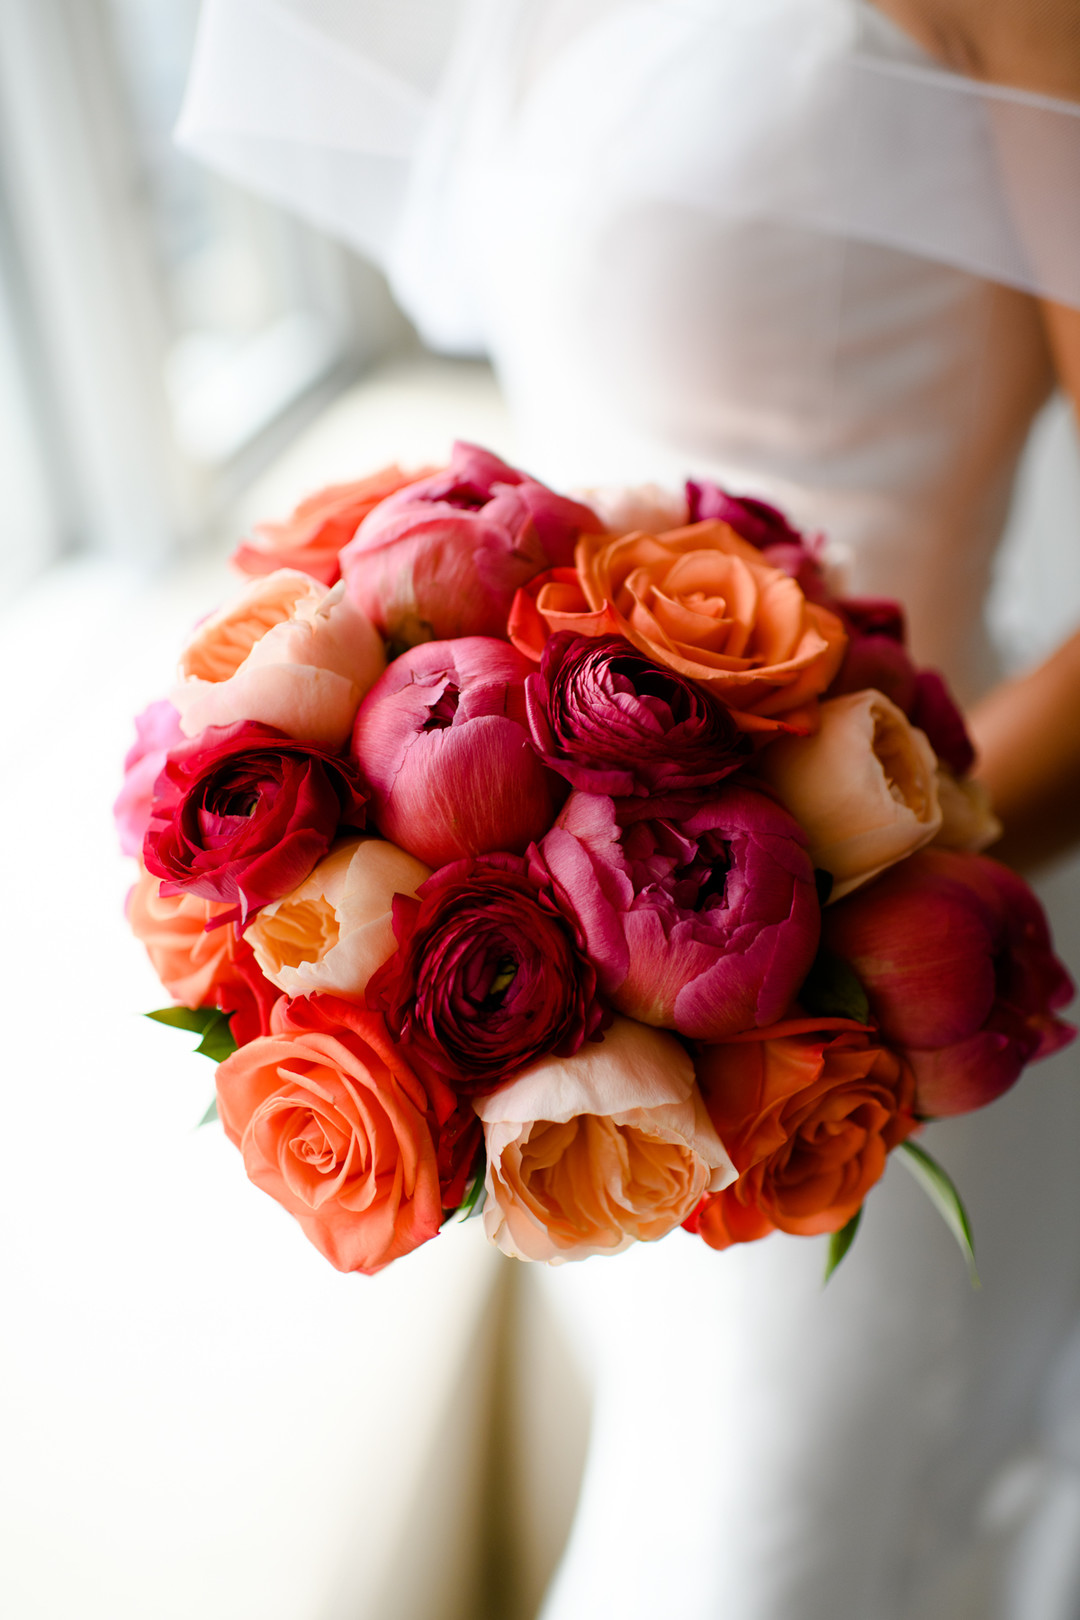 Pink and orange wedding bouquet: Timeless and colorful Chicago wedding in Lincoln Park captured by StudioThisIs. See more wedding ideas at CHItheeWED.com!